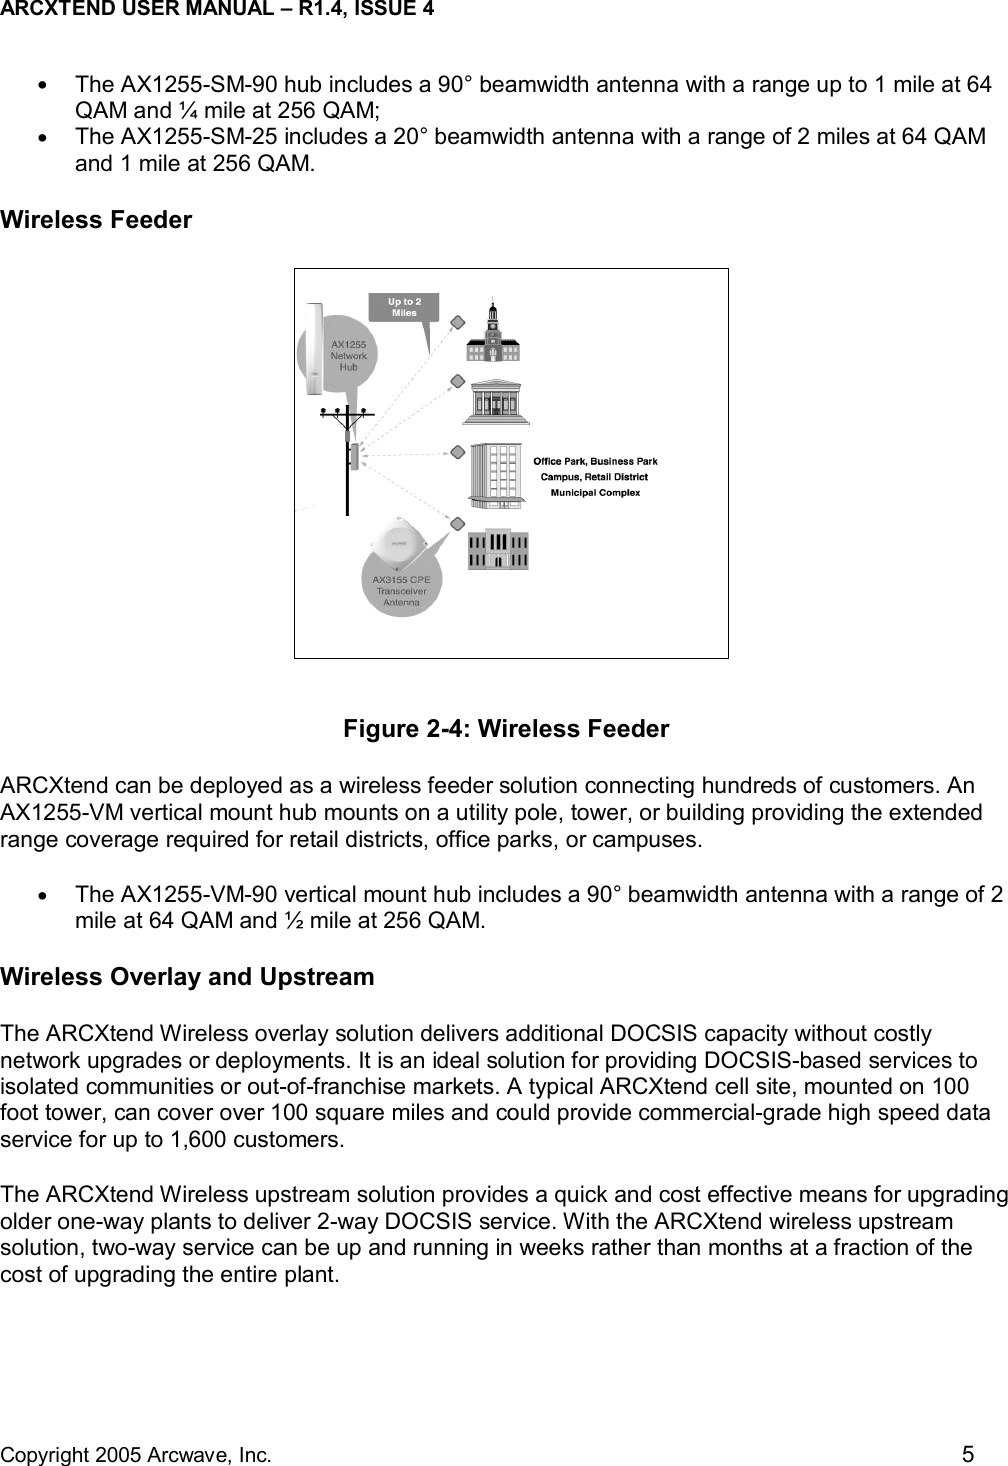 ARCXTEND USER MANUAL – R1.4, ISSUE 4  Copyright 2005 Arcwave, Inc.    5 •  The AX1255-SM-90 hub includes a 90° beamwidth antenna with a range up to 1 mile at 64 QAM and ¼ mile at 256 QAM; •  The AX1255-SM-25 includes a 20° beamwidth antenna with a range of 2 miles at 64 QAM and 1 mile at 256 QAM. Wireless Feeder  Figure 2-4: Wireless Feeder ARCXtend can be deployed as a wireless feeder solution connecting hundreds of customers. An AX1255-VM vertical mount hub mounts on a utility pole, tower, or building providing the extended range coverage required for retail districts, office parks, or campuses. •  The AX1255-VM-90 vertical mount hub includes a 90° beamwidth antenna with a range of 2 mile at 64 QAM and ½ mile at 256 QAM. Wireless Overlay and Upstream The ARCXtend Wireless overlay solution delivers additional DOCSIS capacity without costly network upgrades or deployments. It is an ideal solution for providing DOCSIS-based services to isolated communities or out-of-franchise markets. A typical ARCXtend cell site, mounted on 100 foot tower, can cover over 100 square miles and could provide commercial-grade high speed data service for up to 1,600 customers.   The ARCXtend Wireless upstream solution provides a quick and cost effective means for upgrading older one-way plants to deliver 2-way DOCSIS service. With the ARCXtend wireless upstream solution, two-way service can be up and running in weeks rather than months at a fraction of the cost of upgrading the entire plant.  